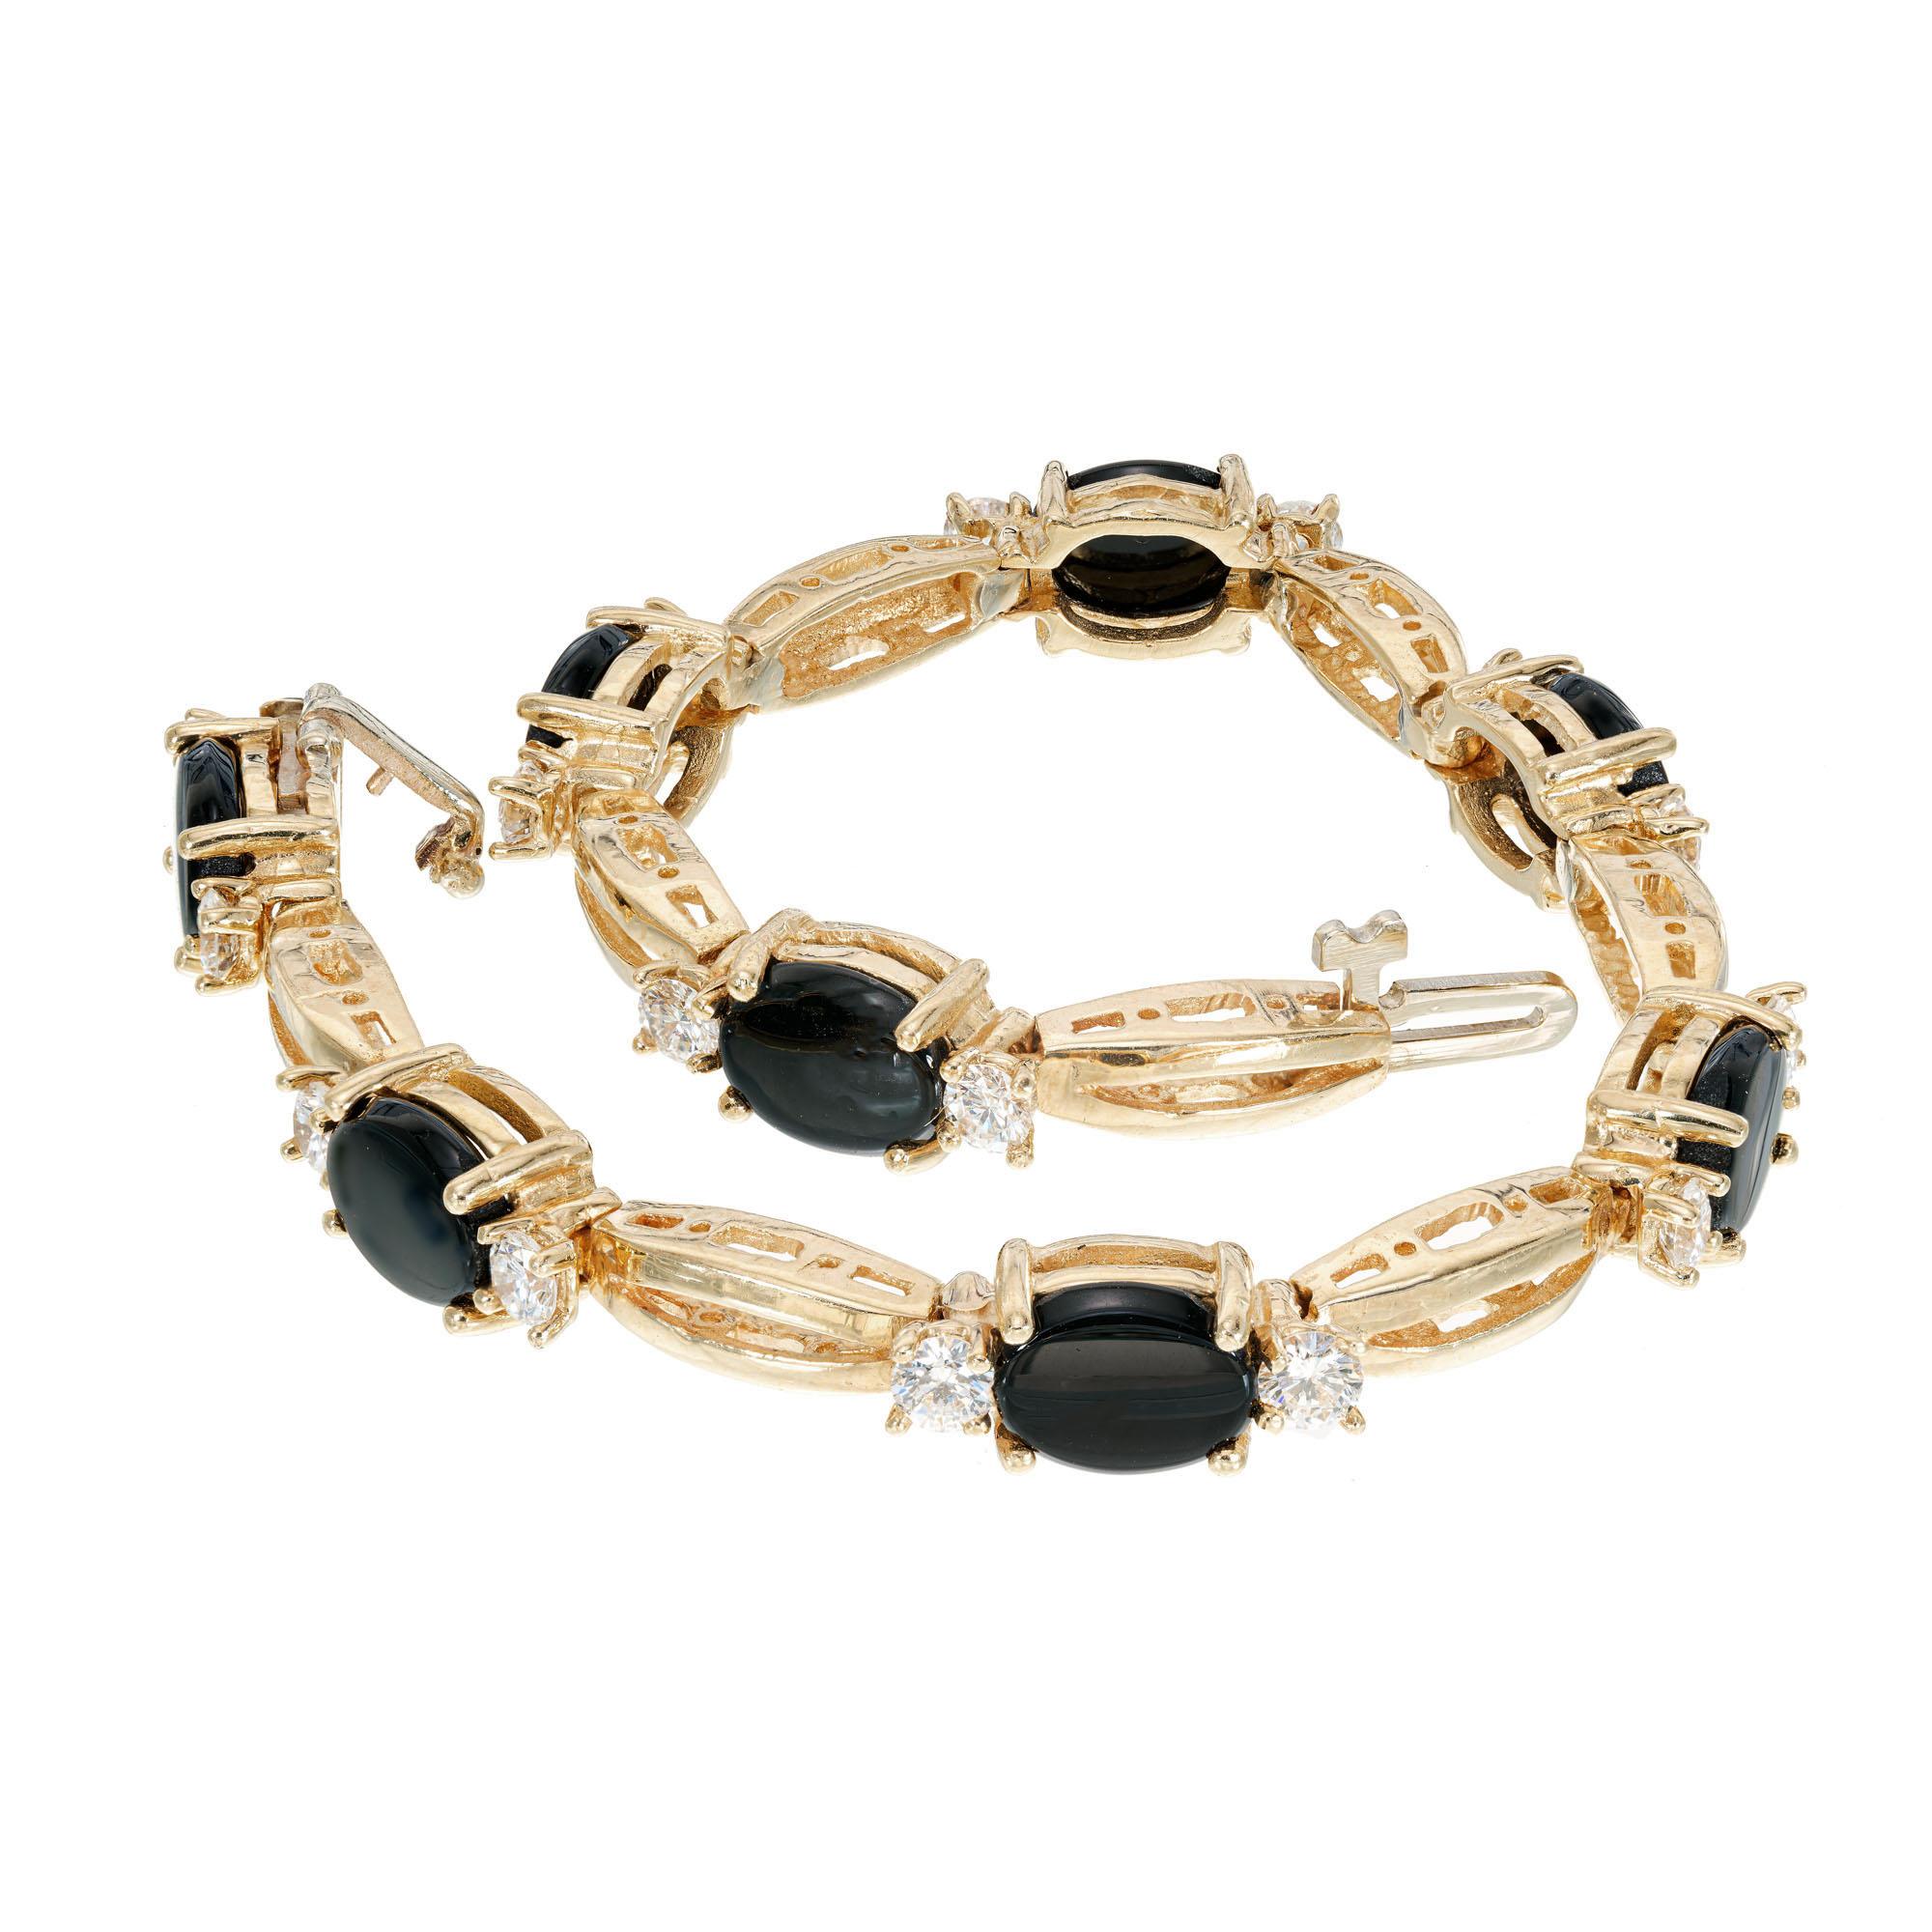 1960's Onyx and diamond link bracelet. 8 oval onyx with 16 round diamonds set in 14k yellow gold. Hidden catch with underside safety.  6.5 inches in length. 

16 round diamonds approx. total weight 1.30cts, G, VS
8 oval onyx 6 x 8mm
14k Yellow